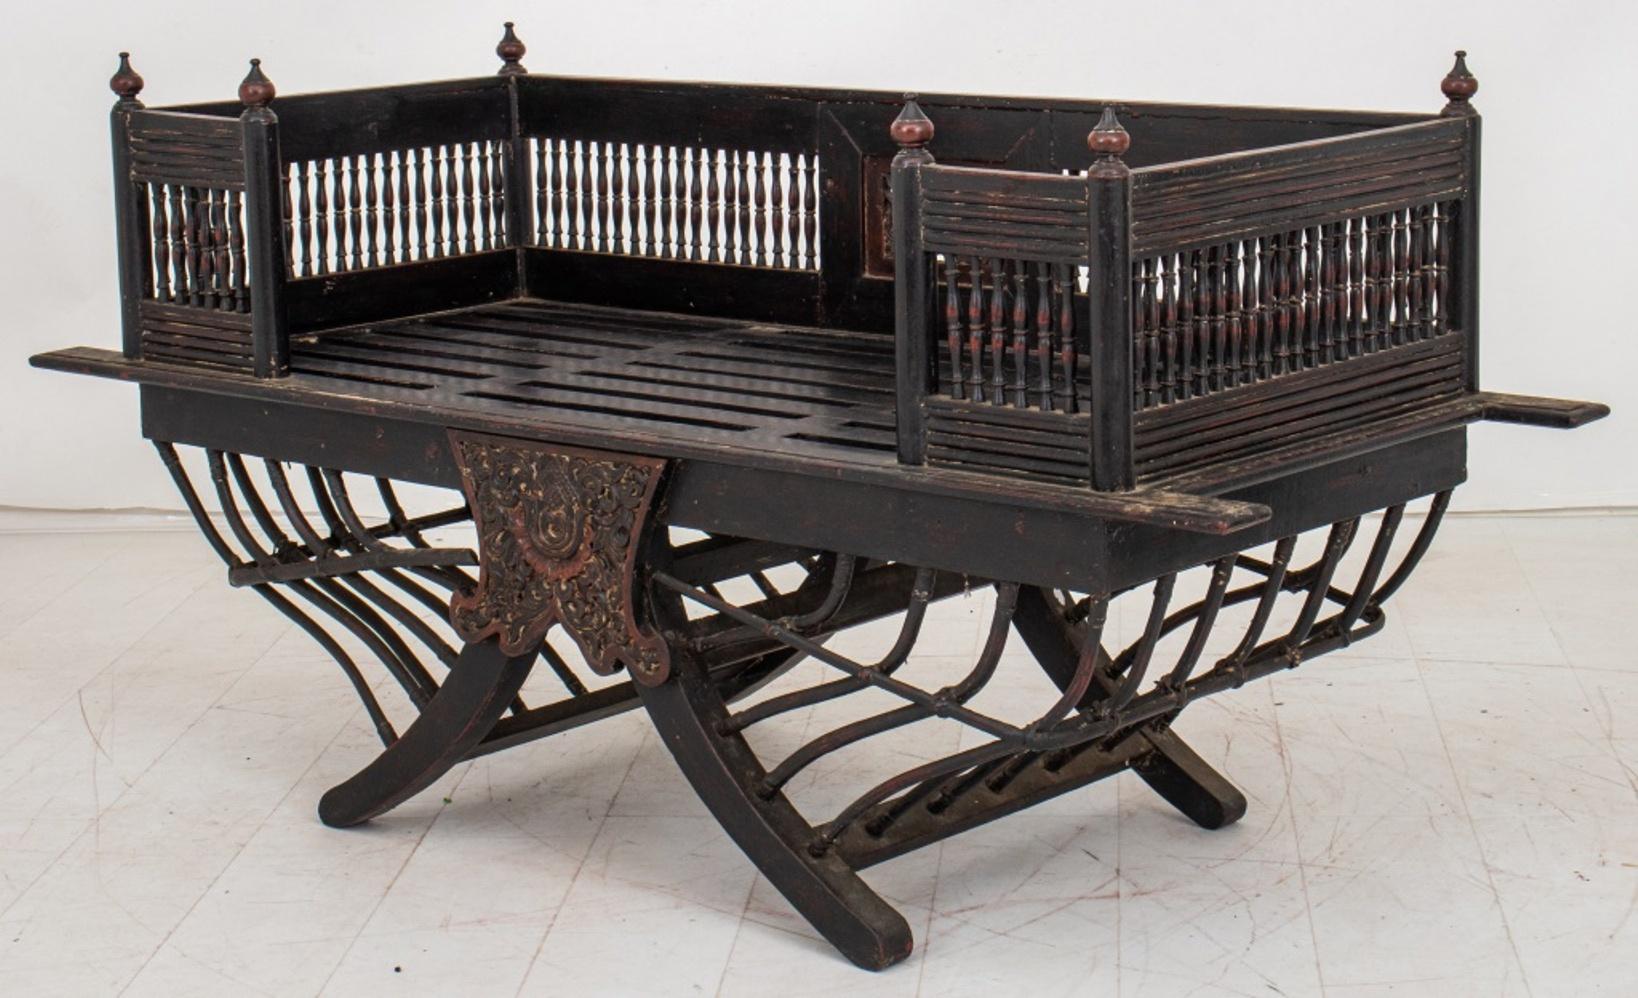 Indian Howdah, or elephant saddle, in polychromed rosewood, the rectangular seat with galleried sides above an arching support for the back of the elephant. In good antique condition. Wear consistent with age and use.

Dimensions:   33